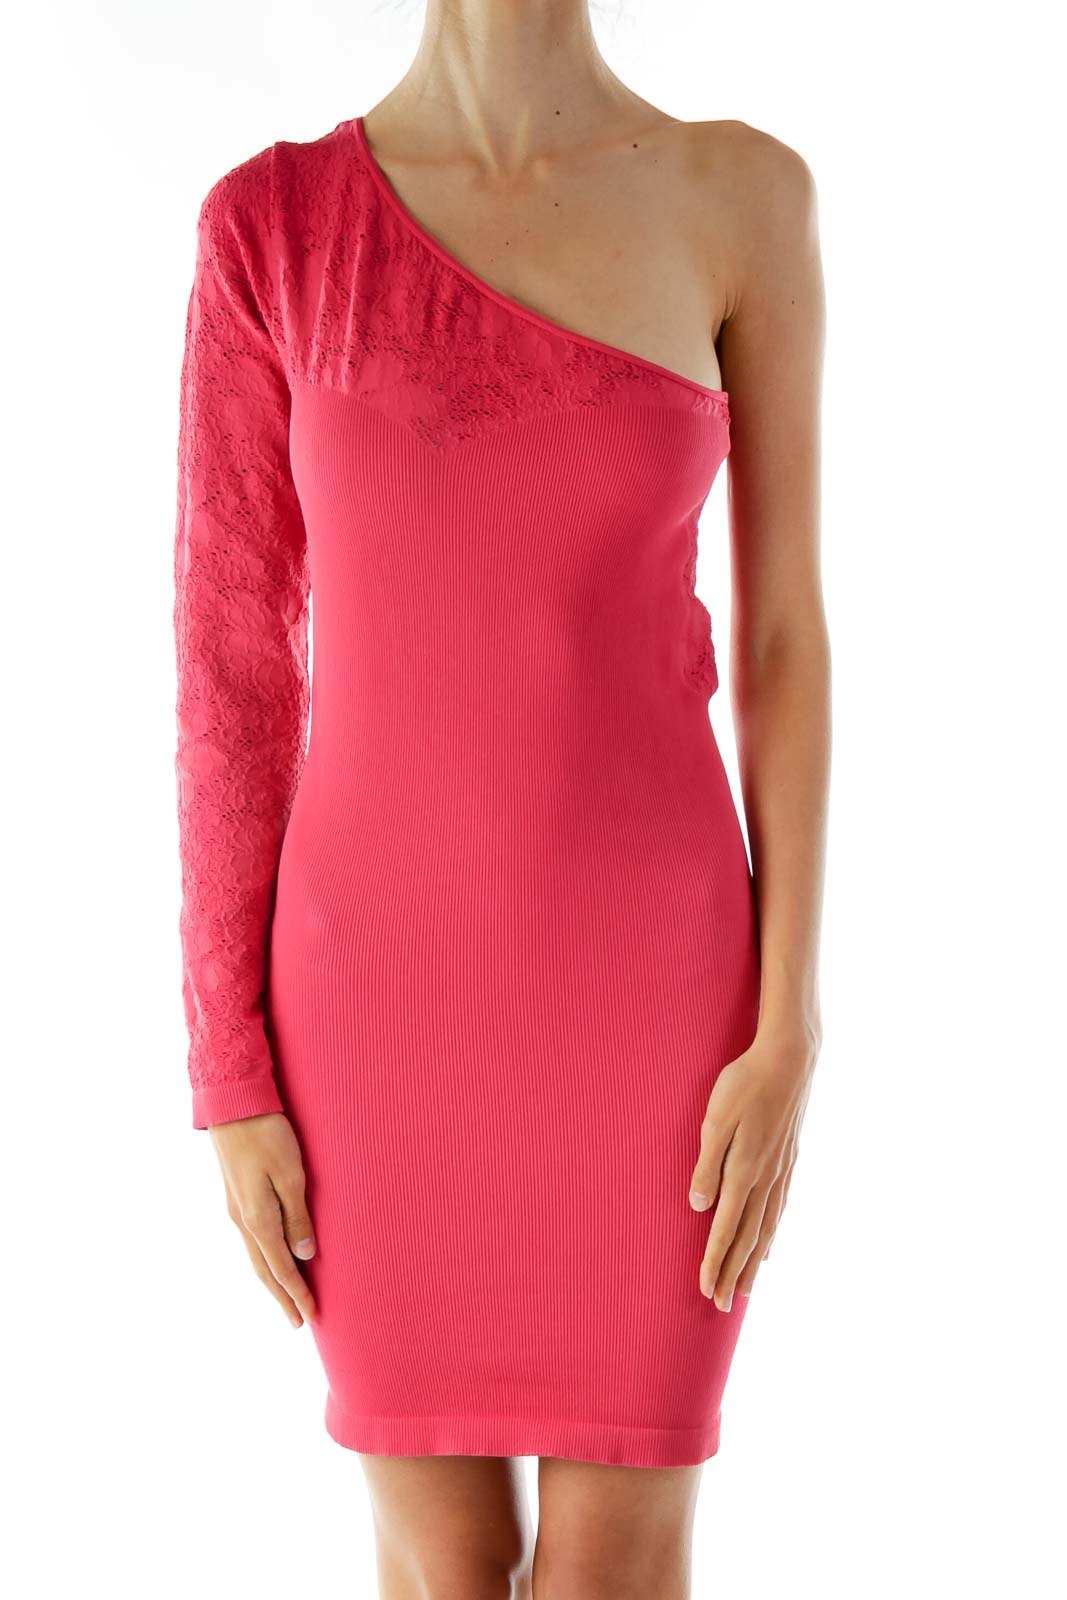 Pink One-Shoulder Bodycon Cocktail Dress Front